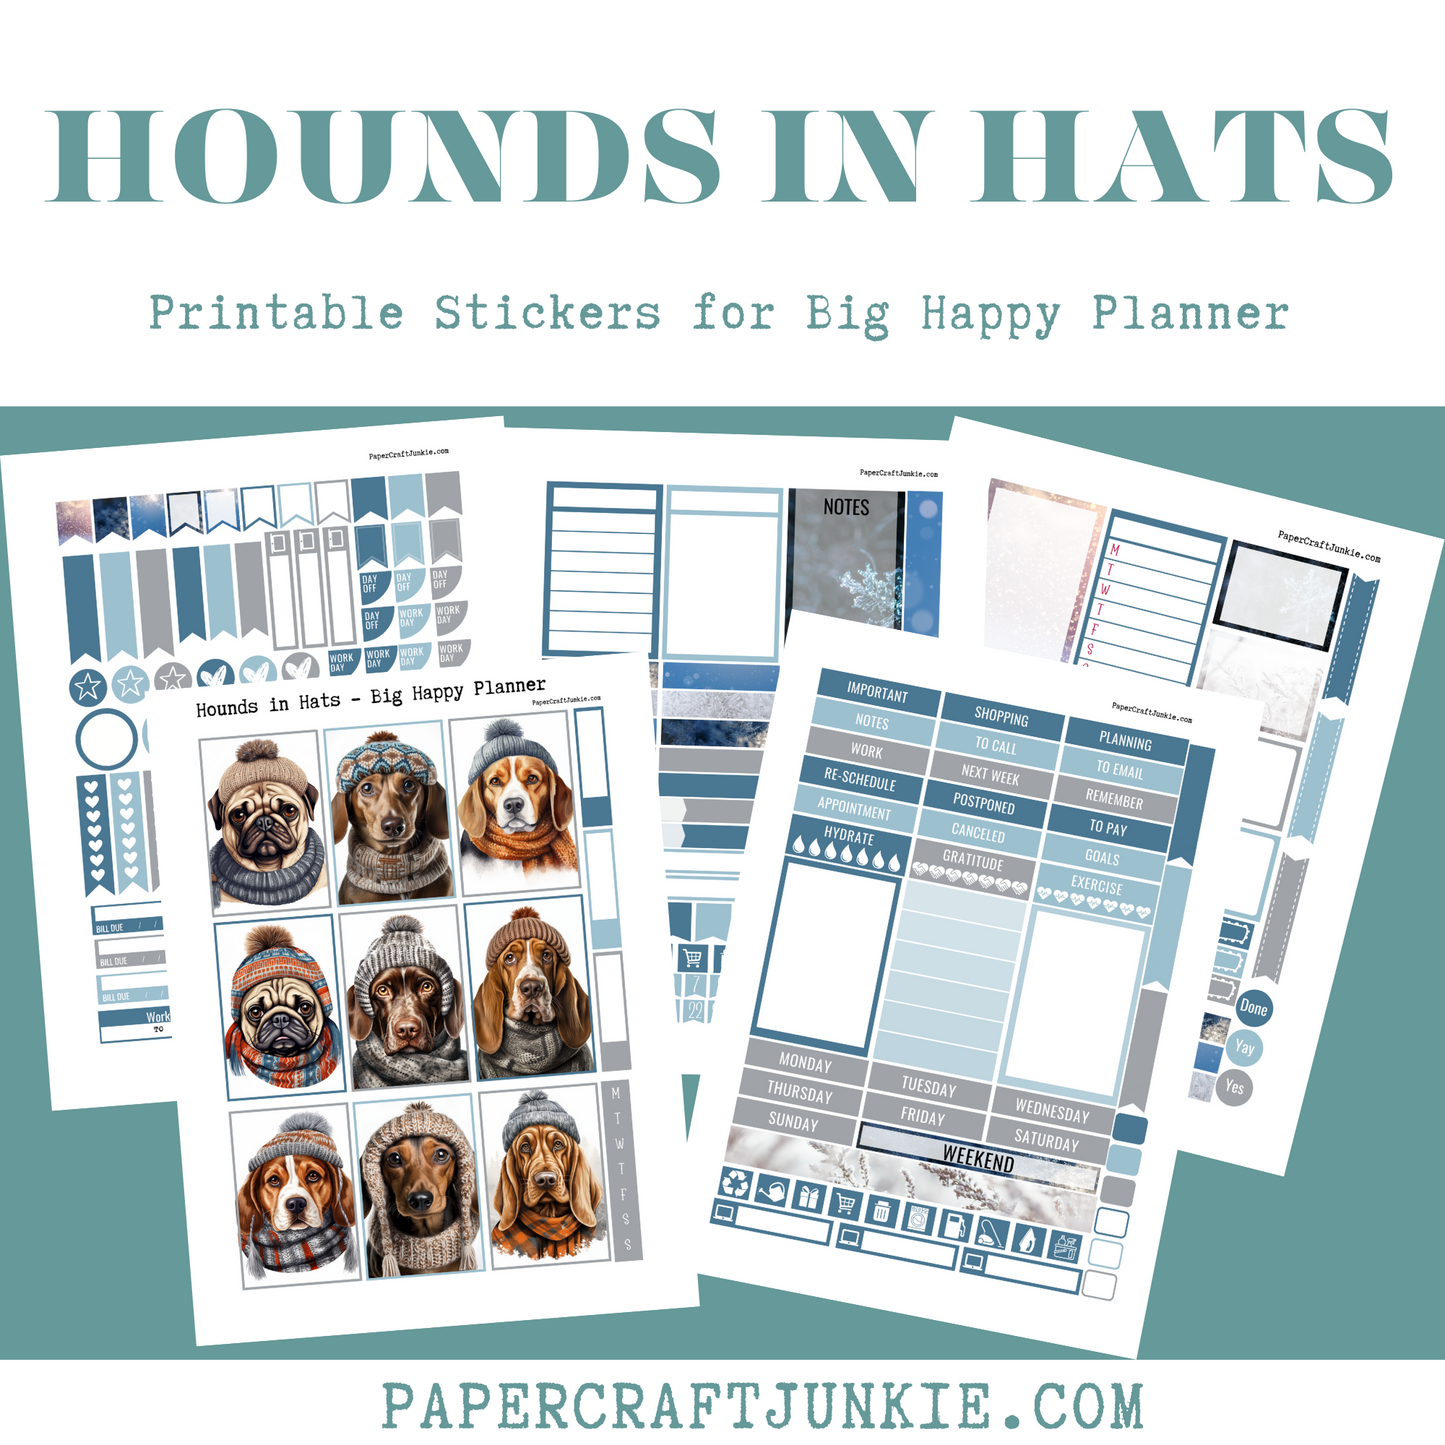 Hounds in Hats - Big Happy Planner Printable Stickers